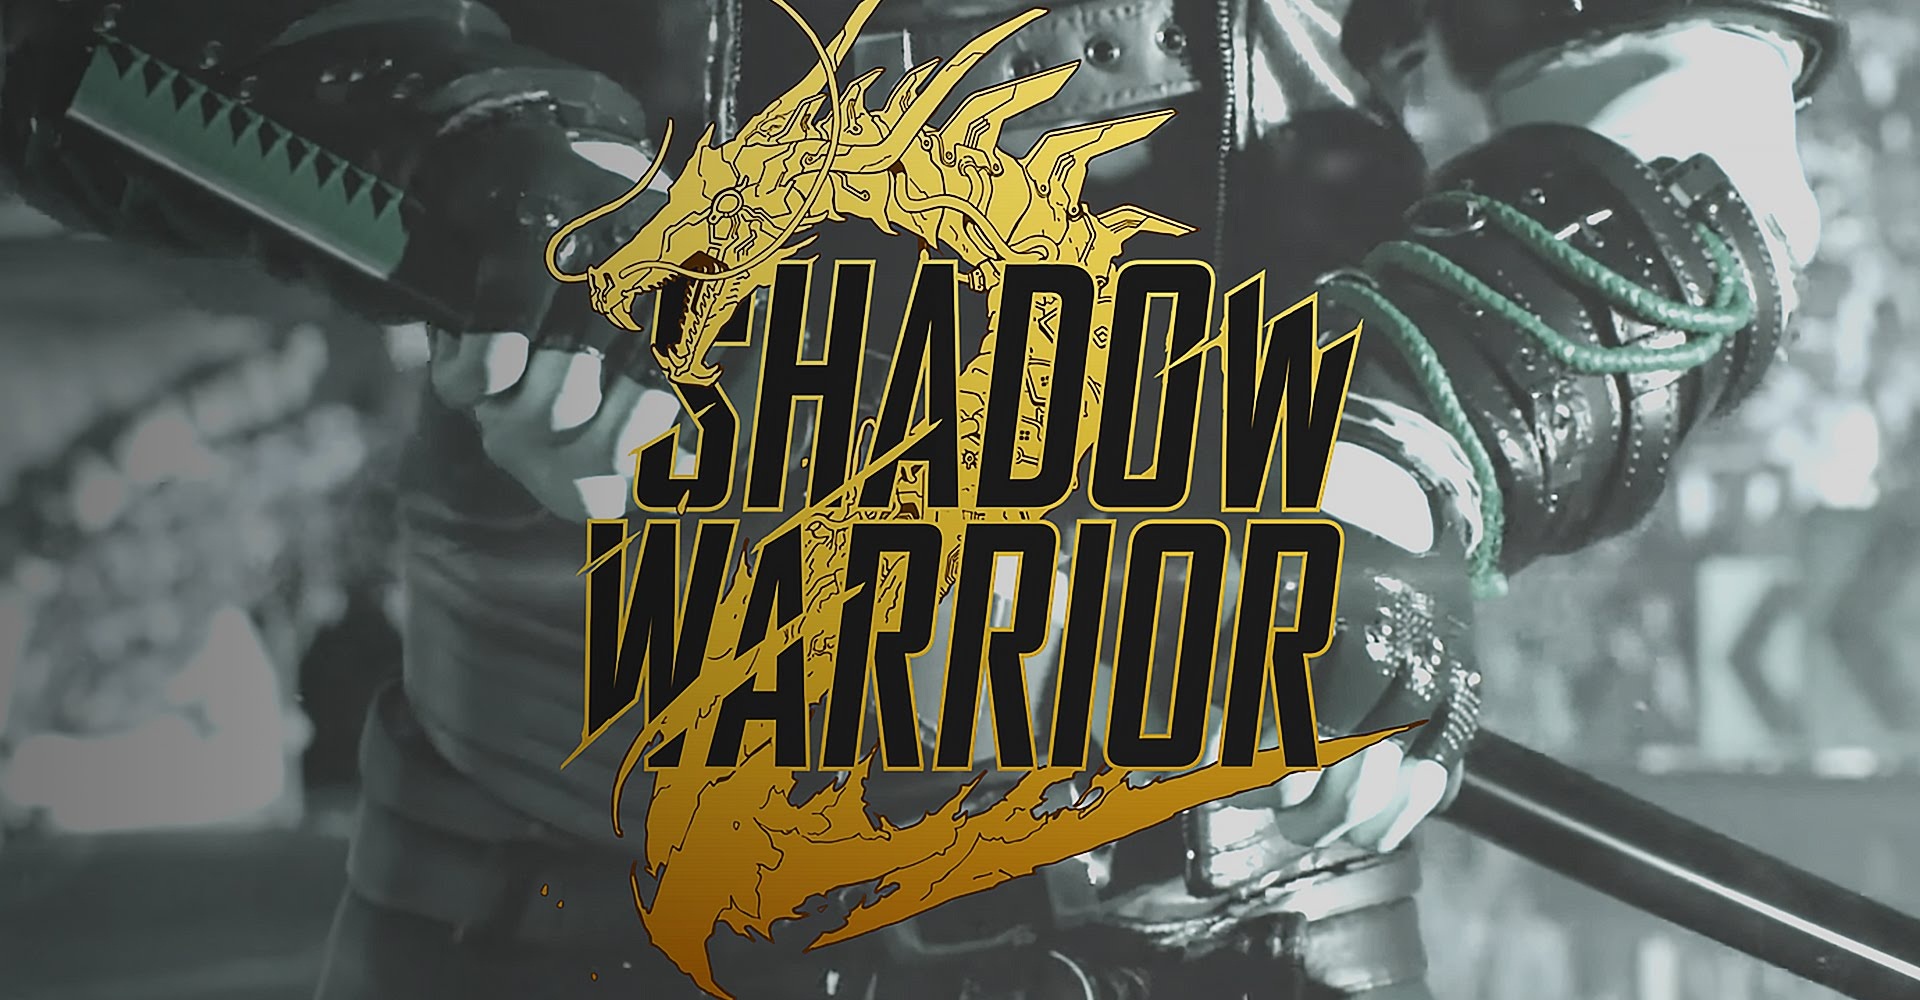 download free the shadow warrior 2